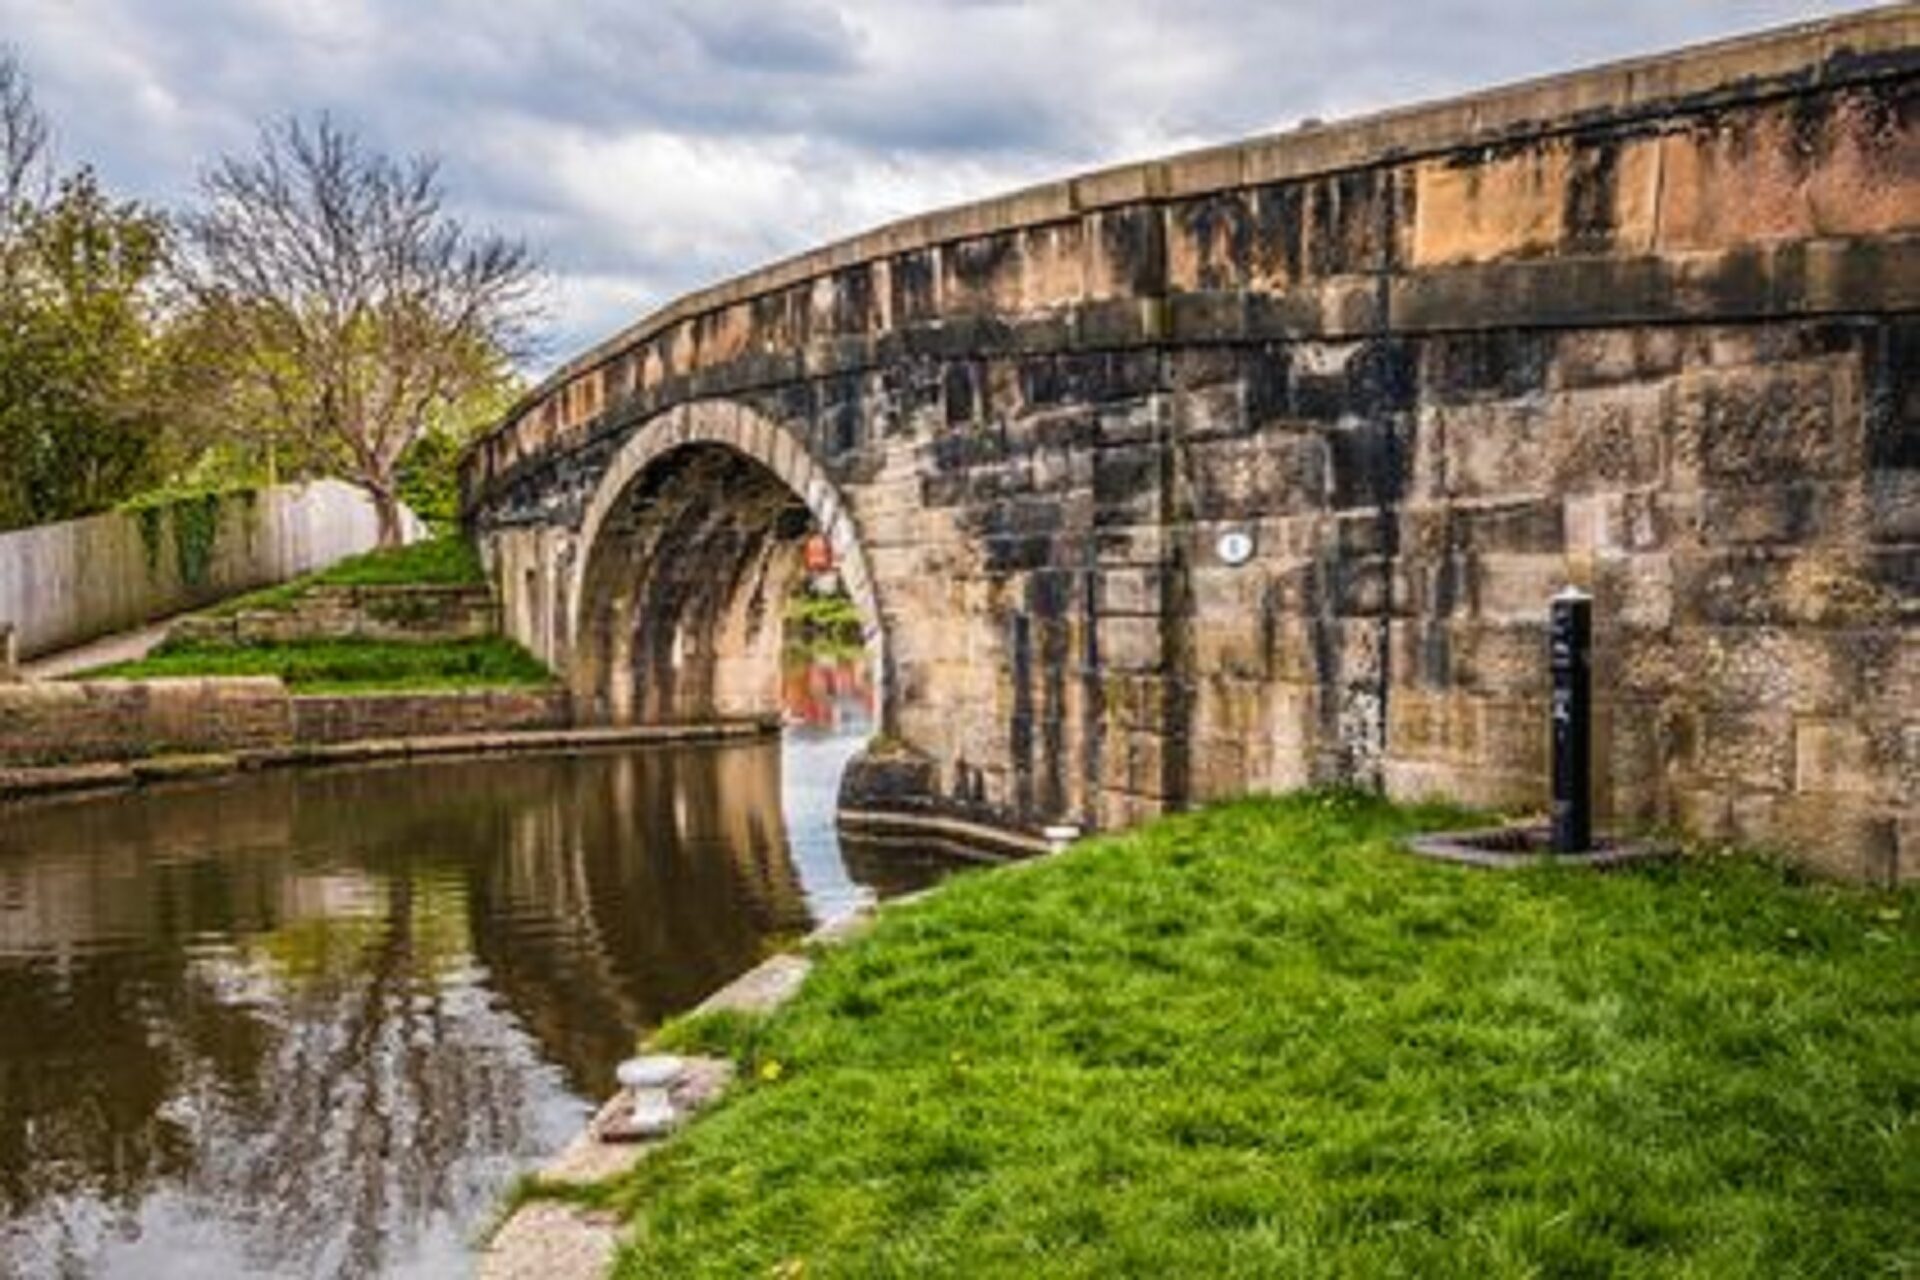 Building the Leeds & Liverpool Canal